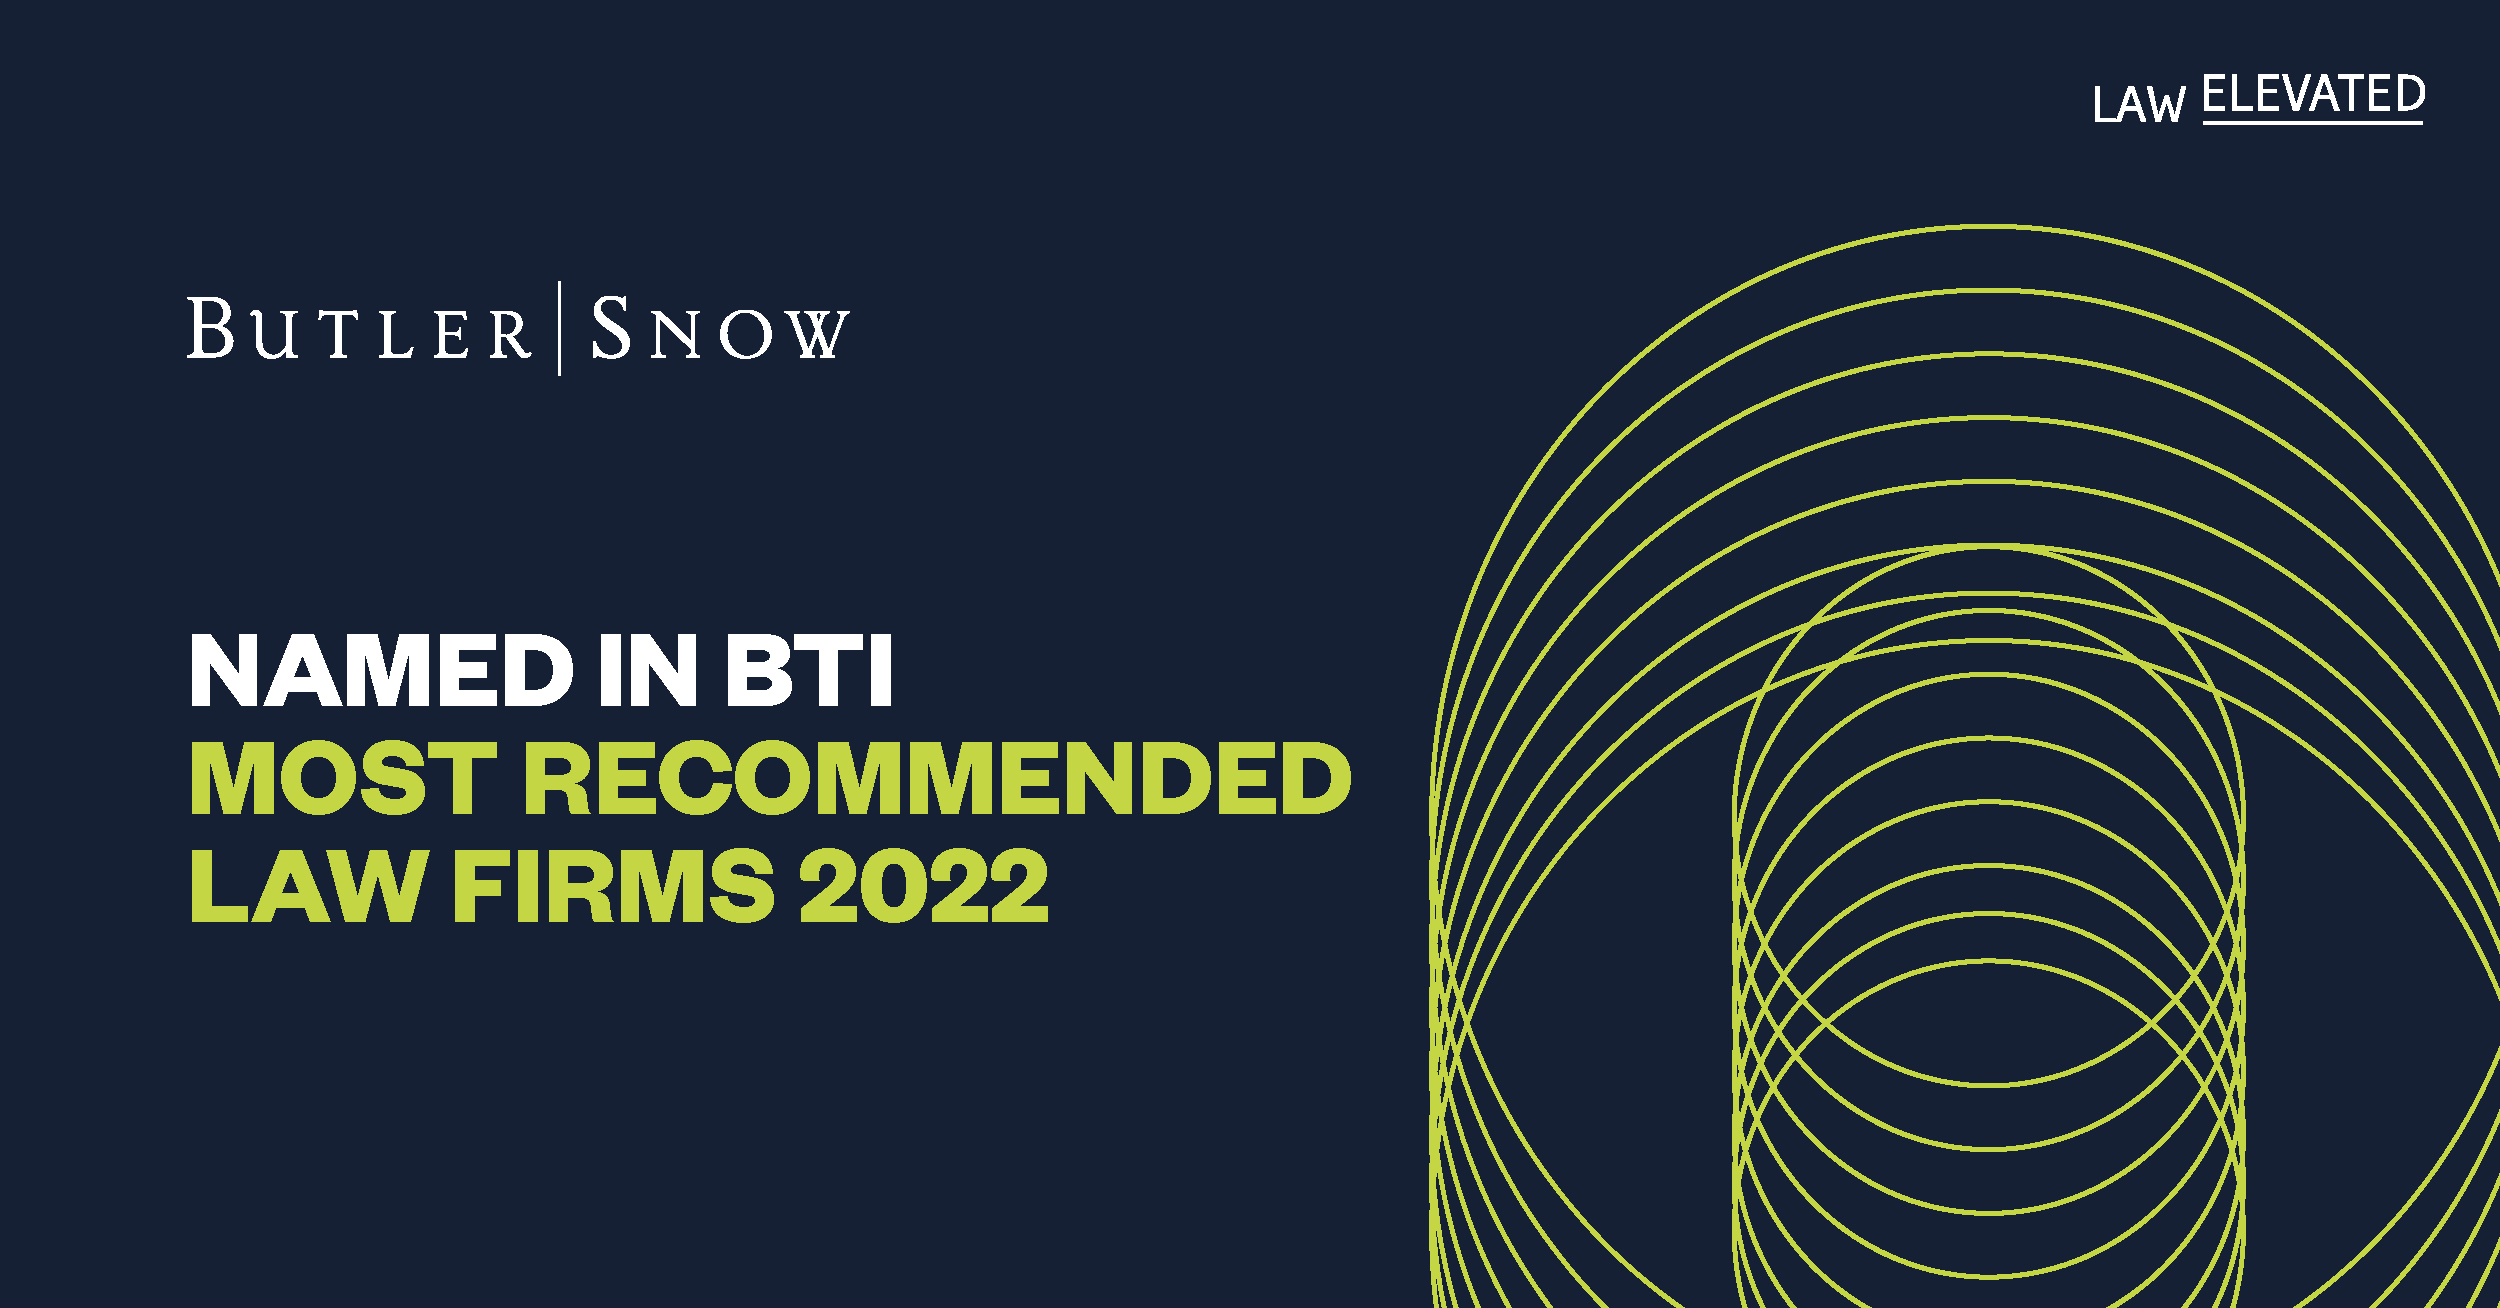 Butler Snow Named in BTI Most Recommended Law Firms 2022